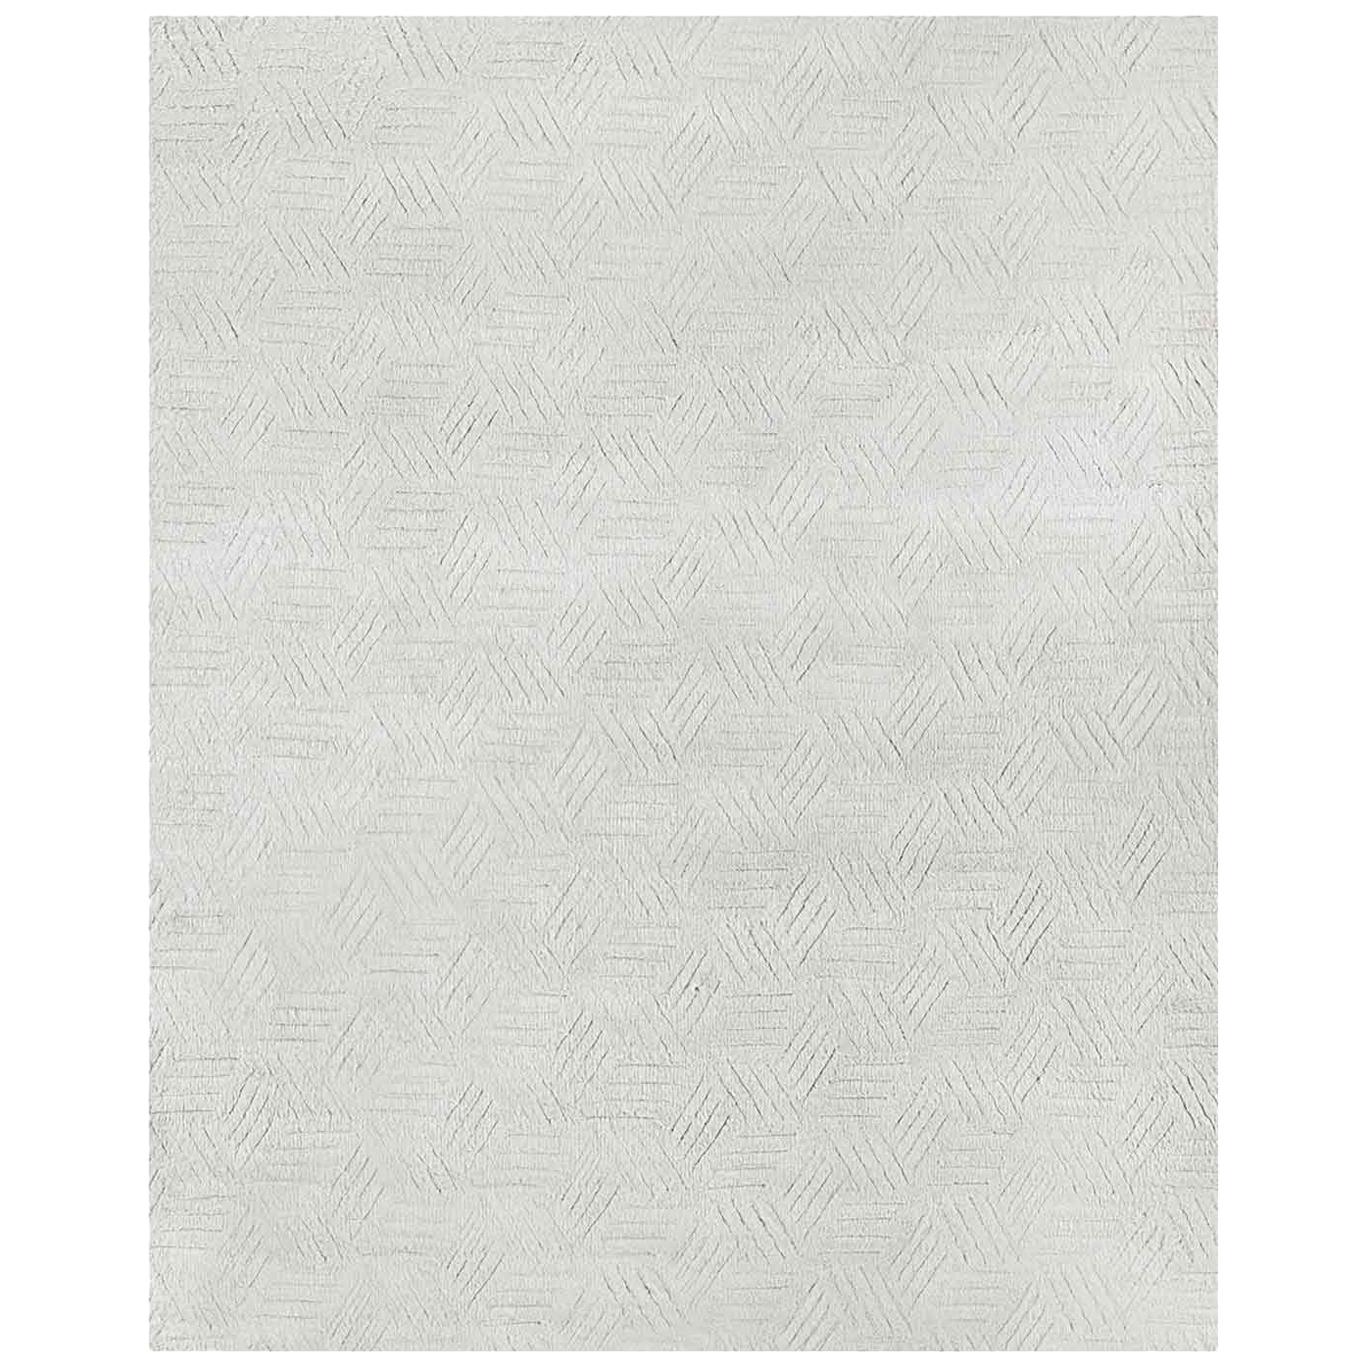 For Sale: Silver (Silver/Charcoal) Ben Soleimani Mirada Rug– Moroccan Hand-knotted Plush Silver/Charcoal 12'x15'